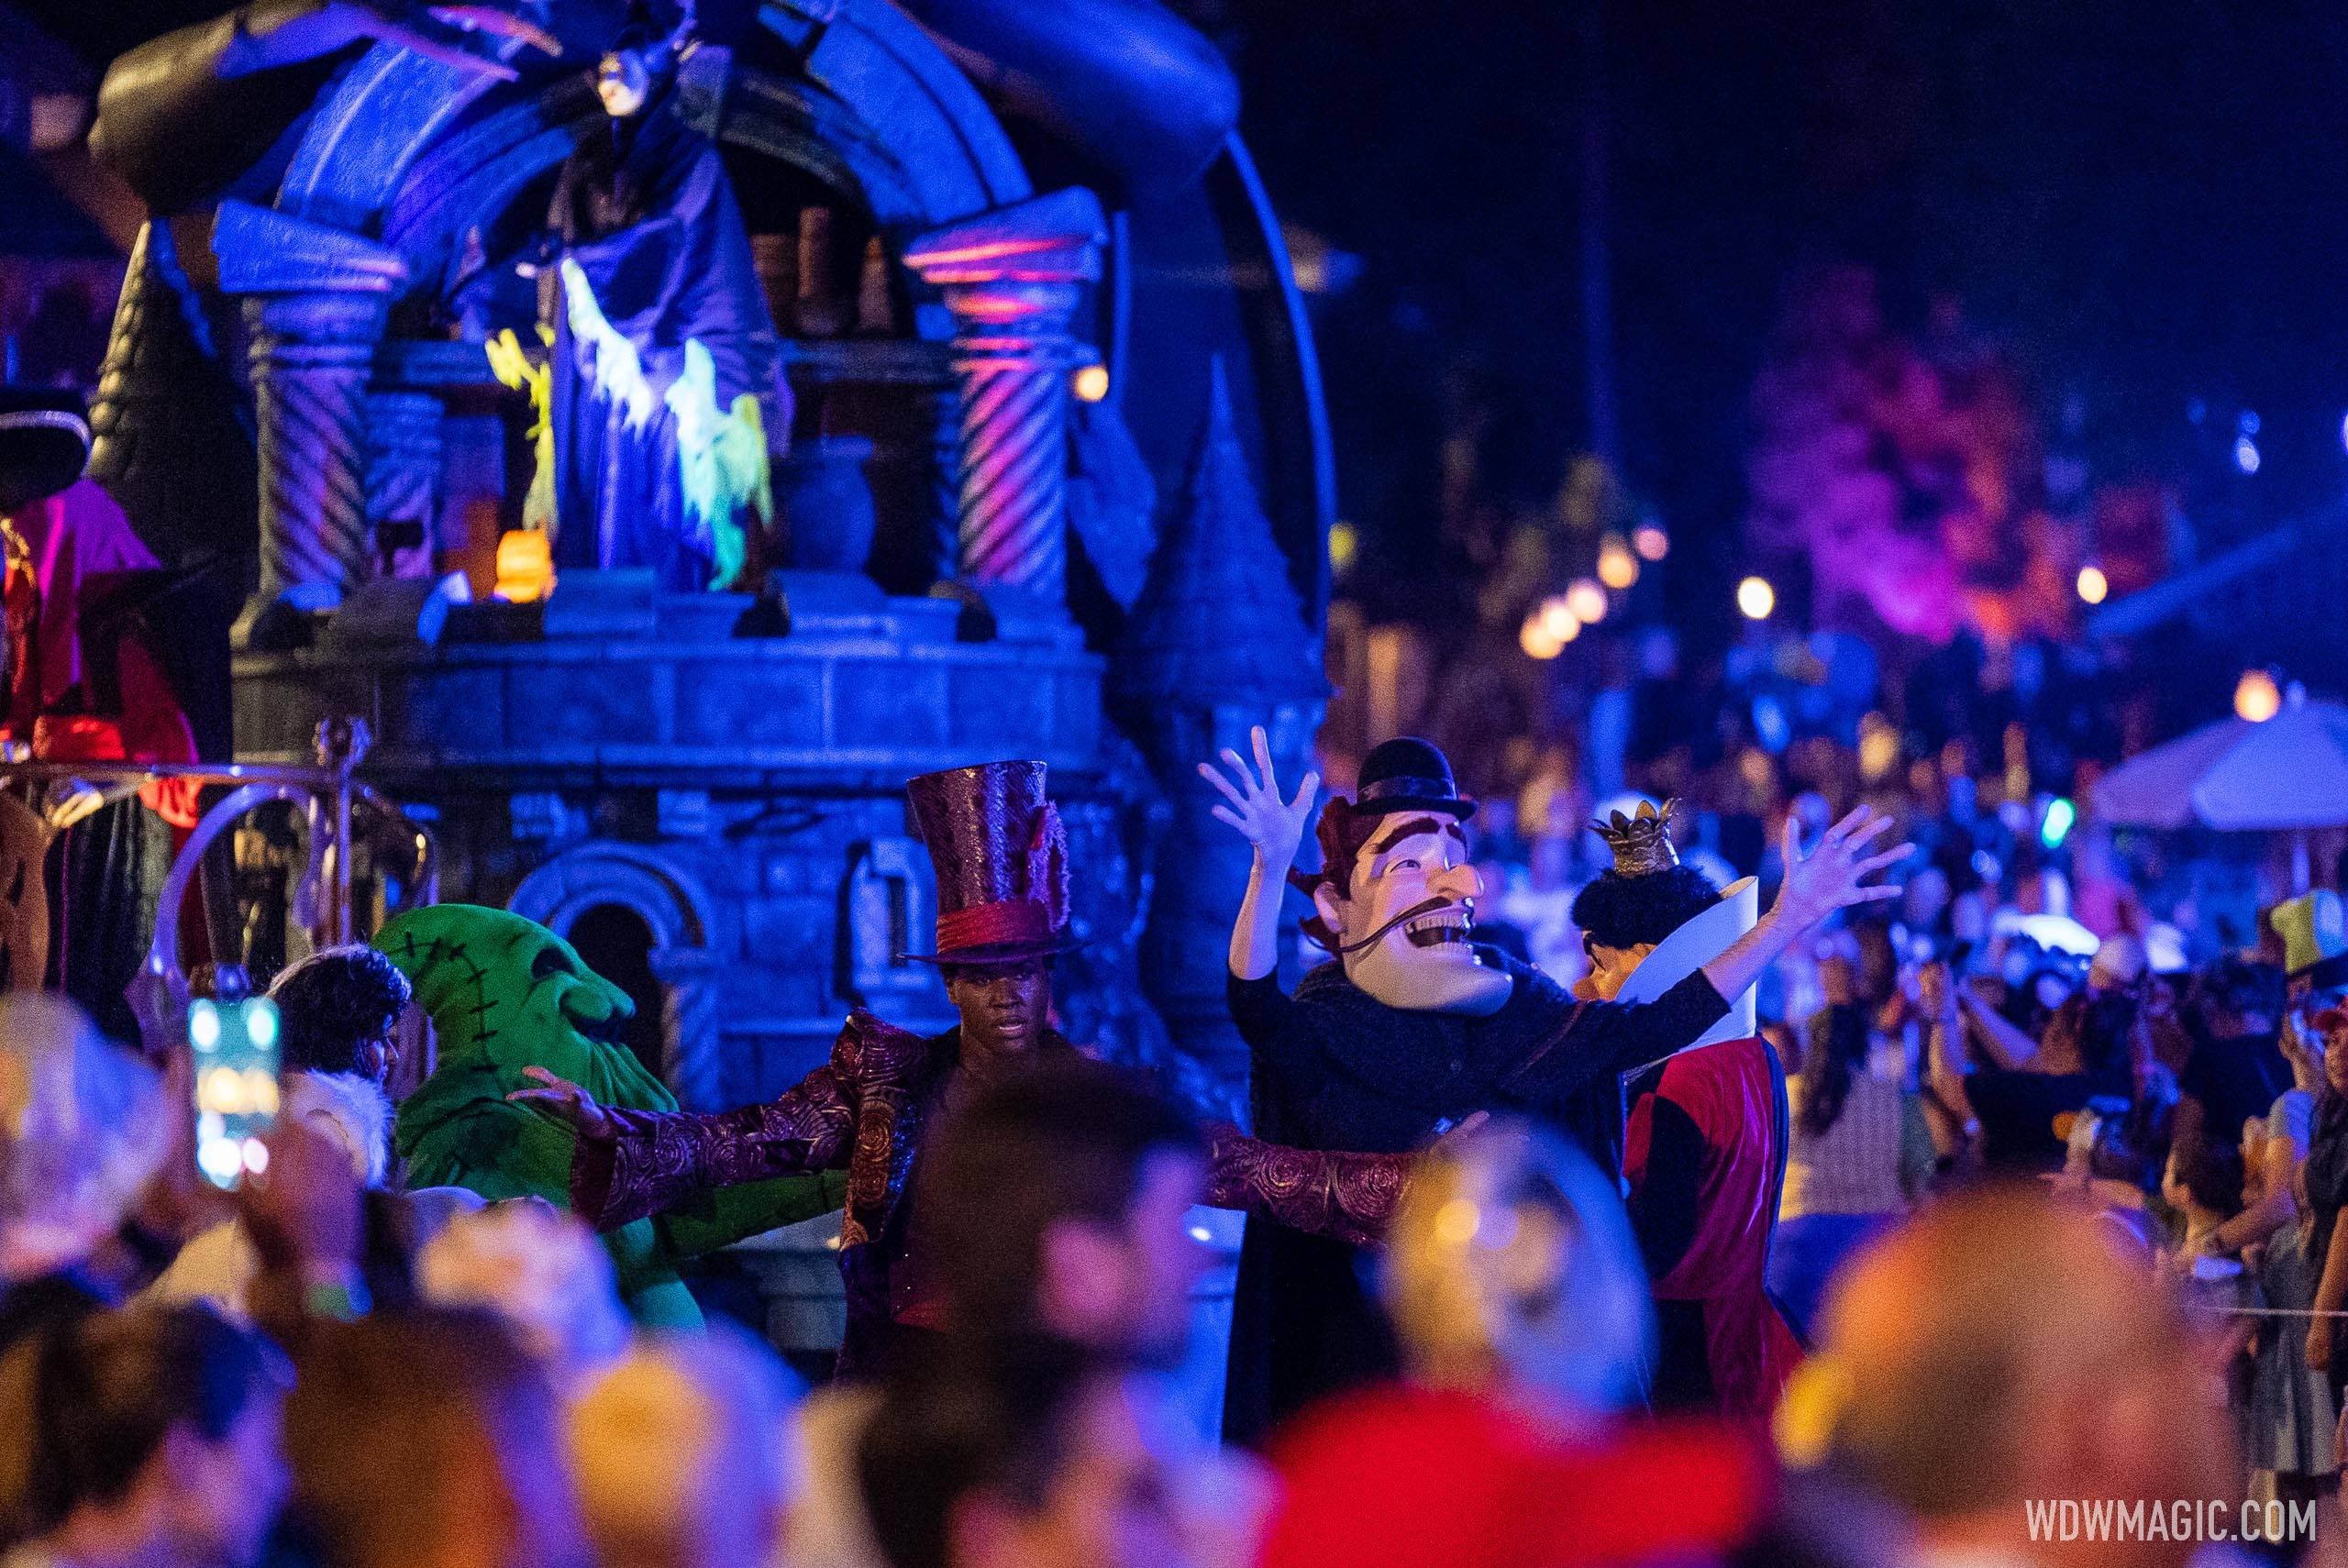 Mickey's Boo-To-You Halloween Parade - Bowler Hat Guy